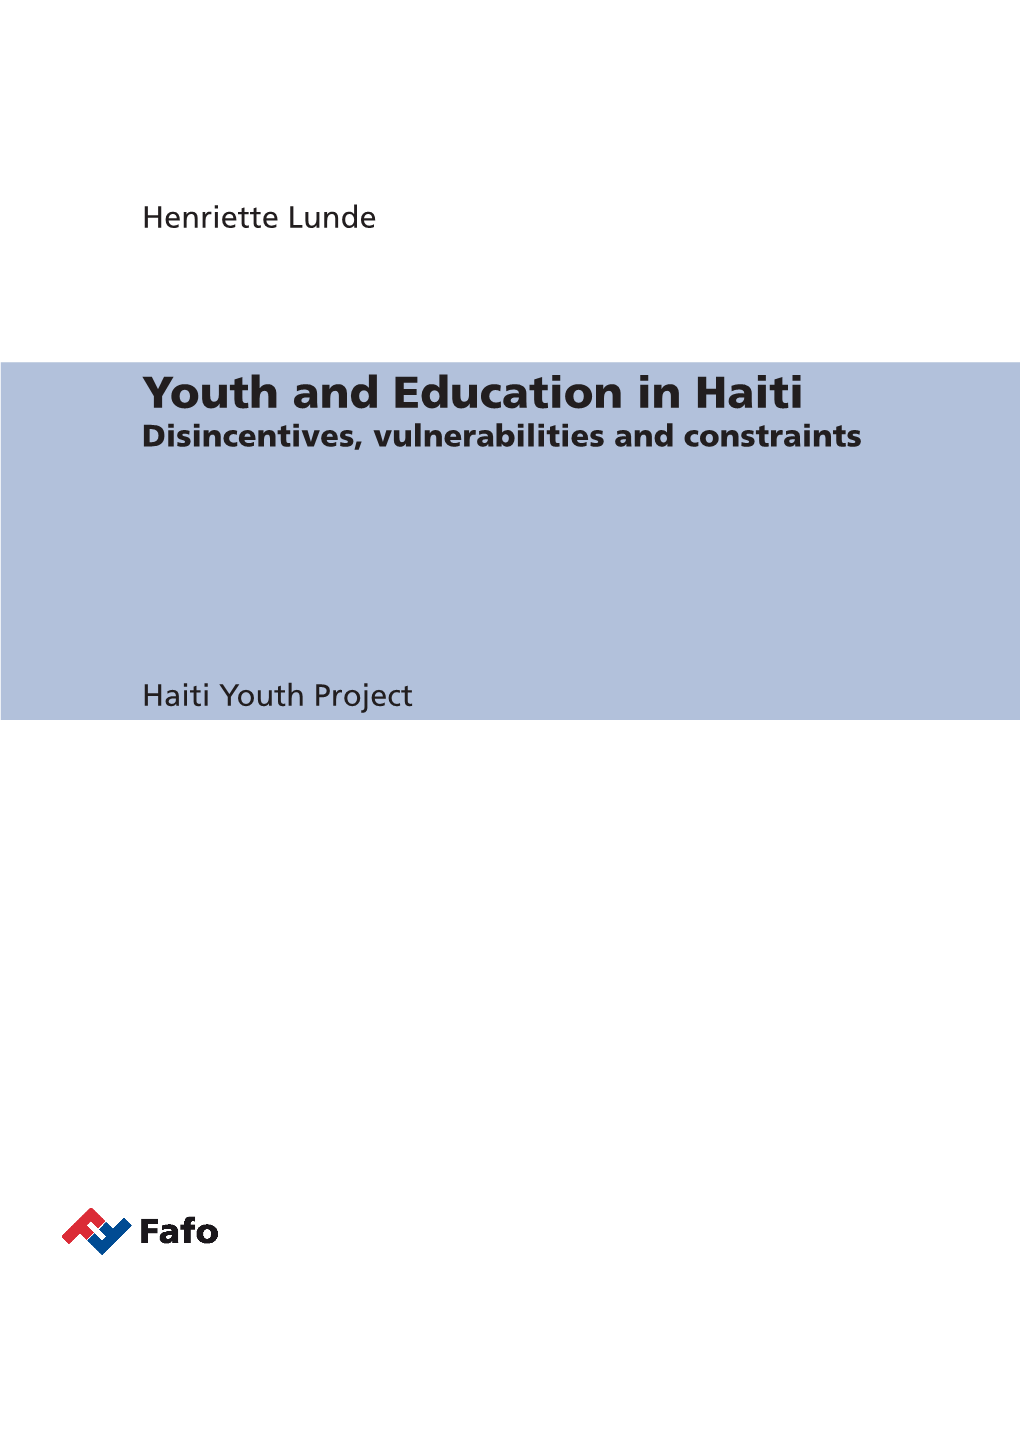 Youth and Education in Haiti Disincentives, Vulnerabilities and Constraints